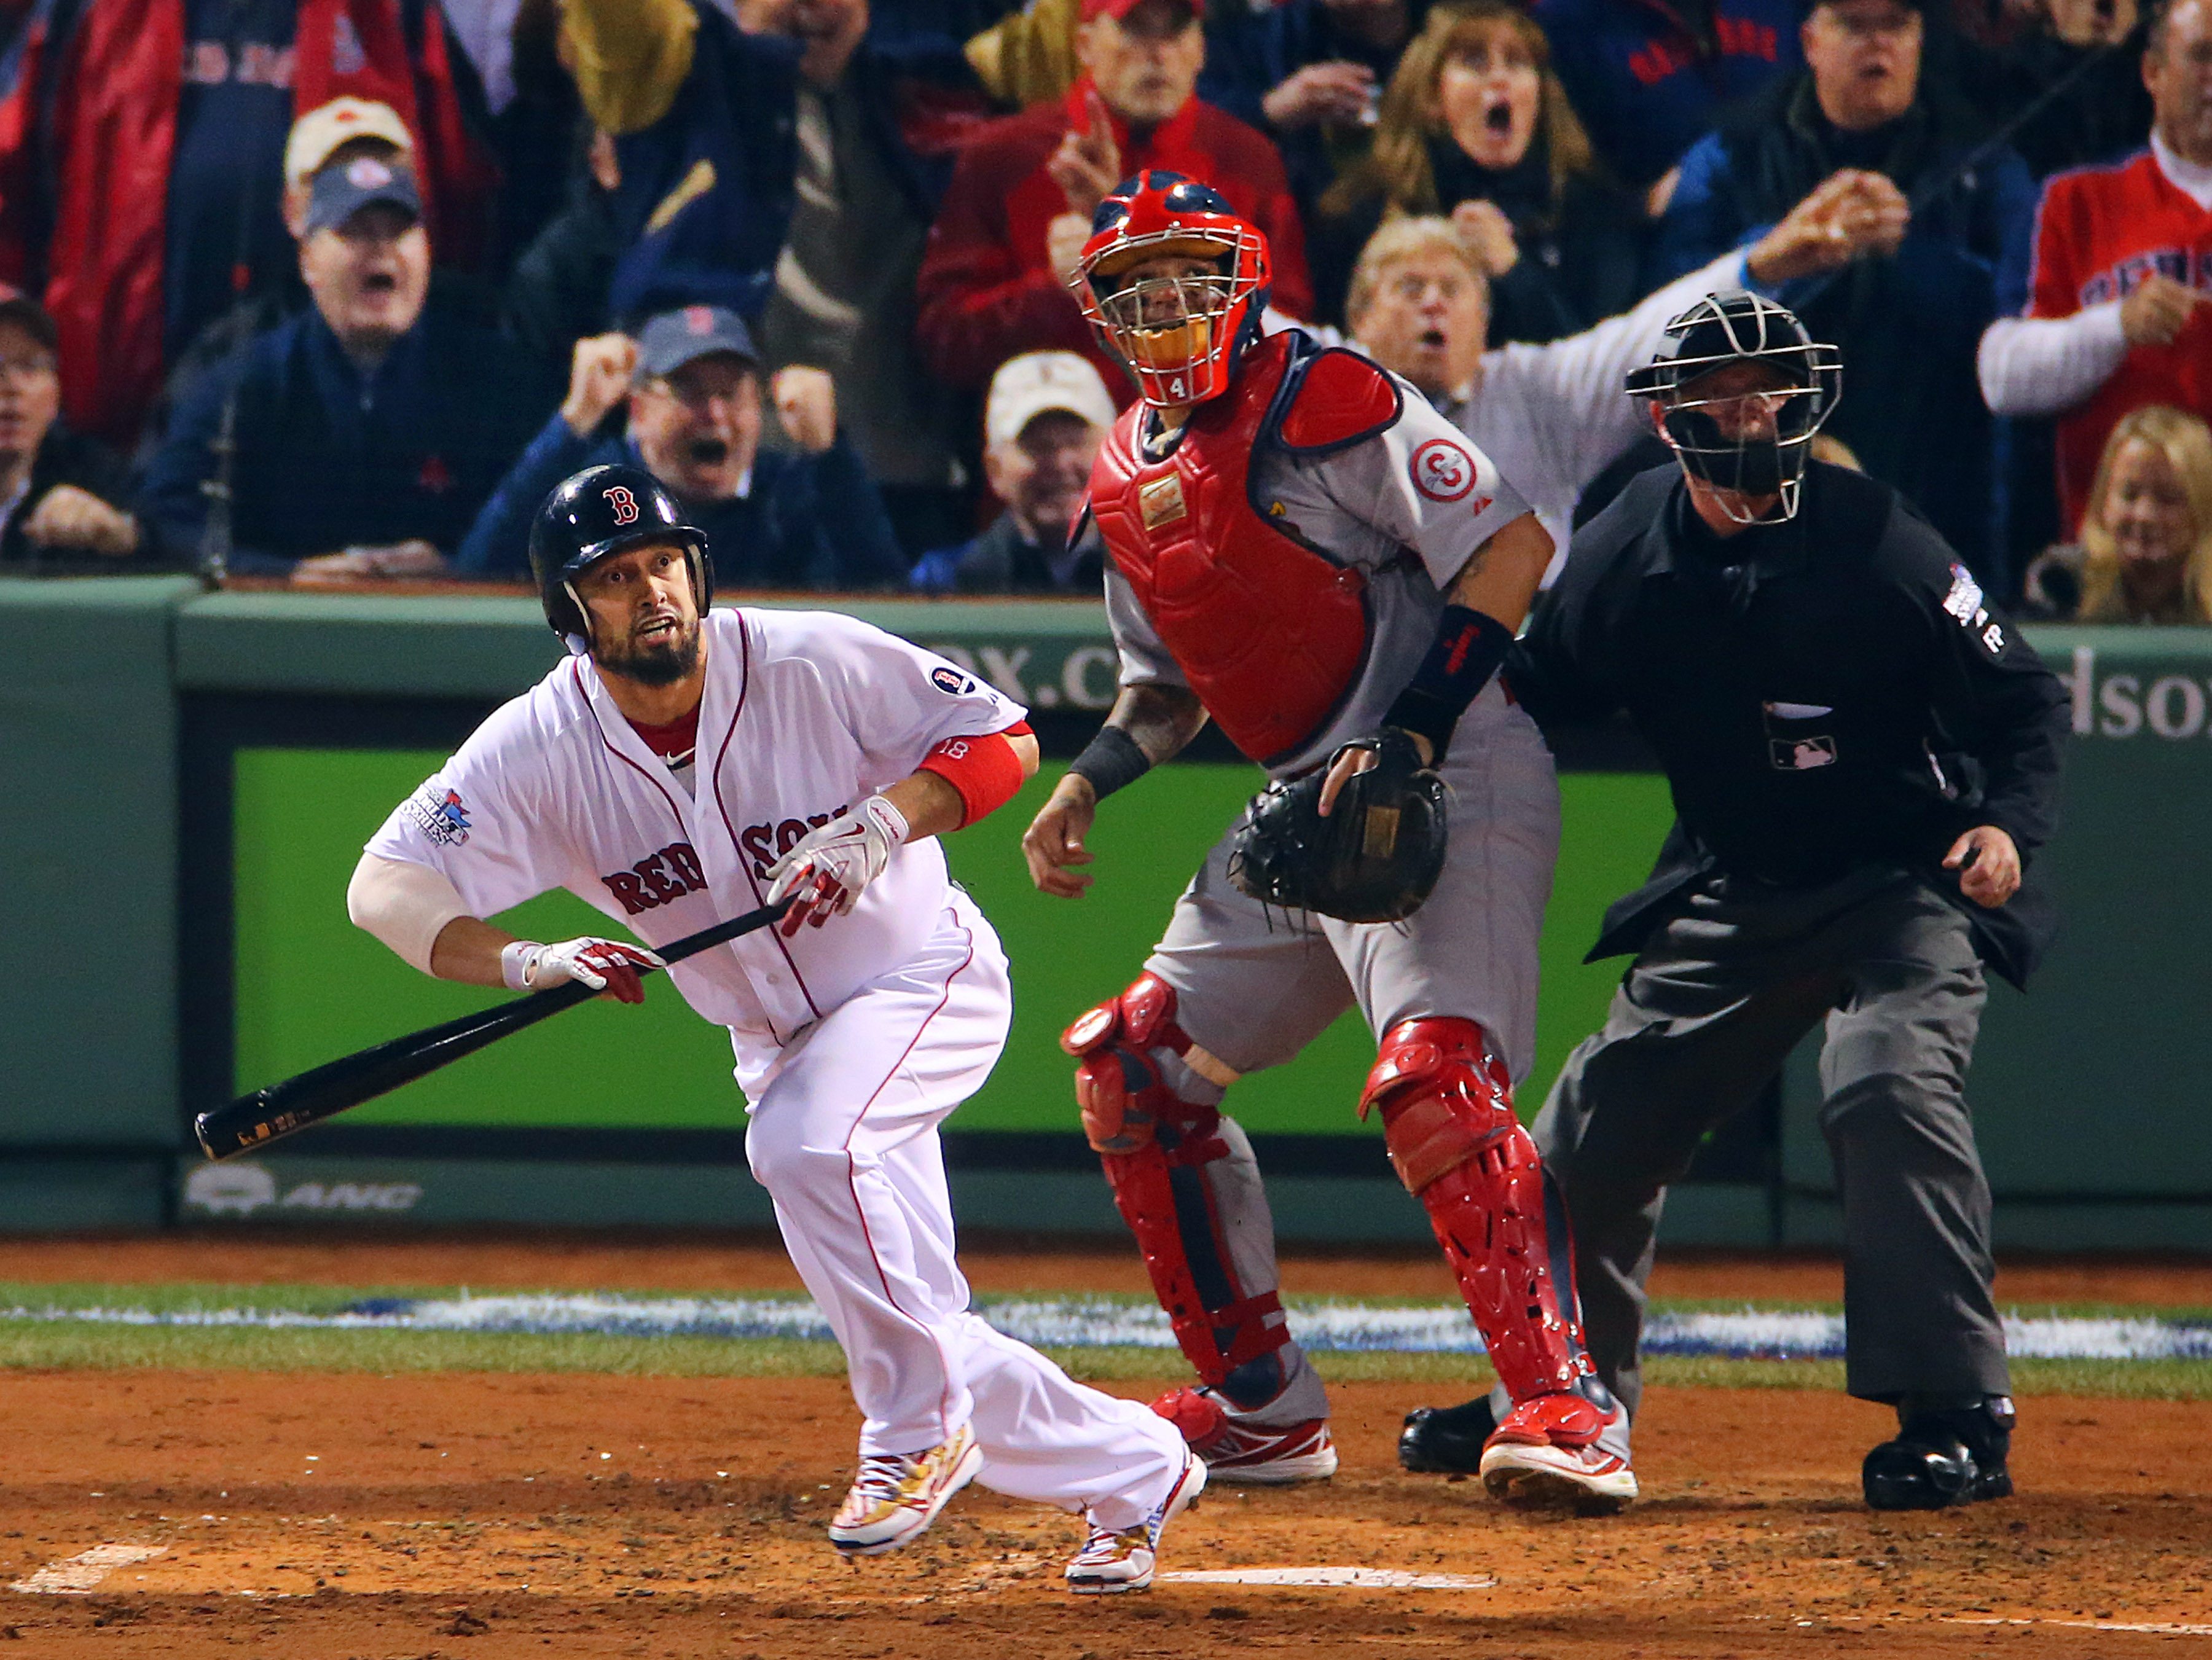 Boston Red Sox 2013 World Series champ Shane Victorino retires, plans to  sign a one-day contract with Phillies 